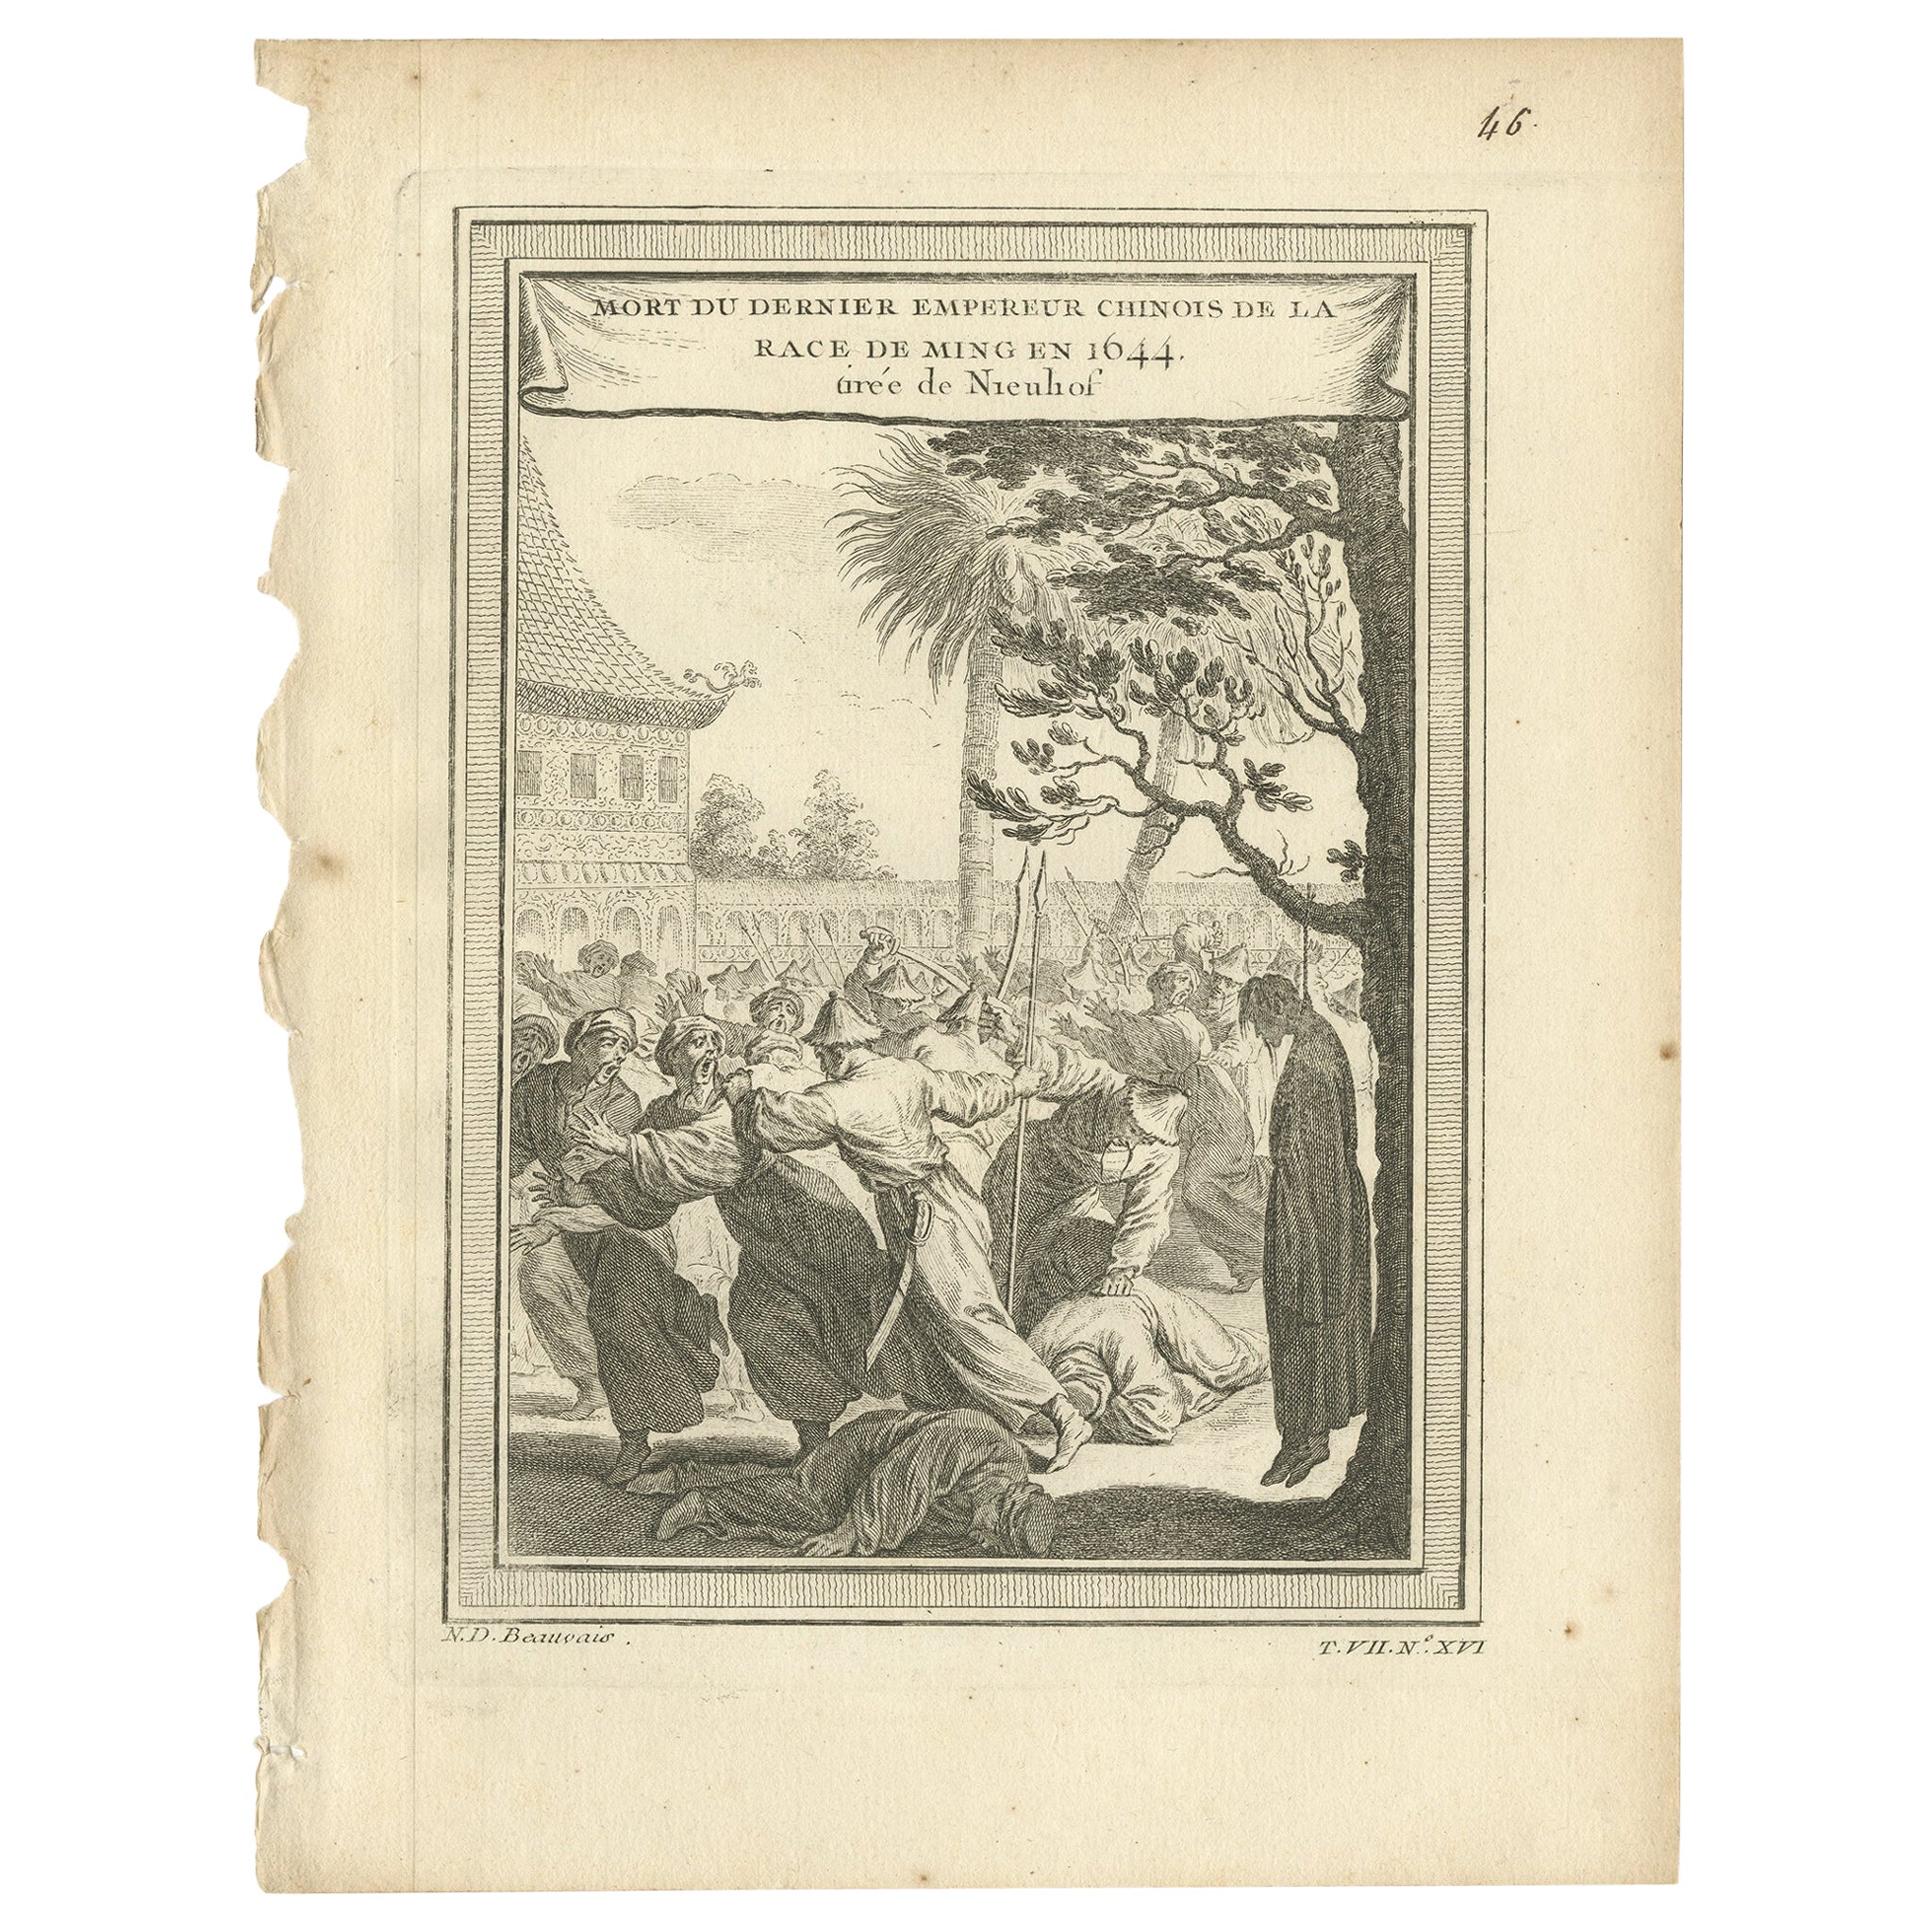 Antique Print of the Death of the Last Ming Emperor in China, 1746